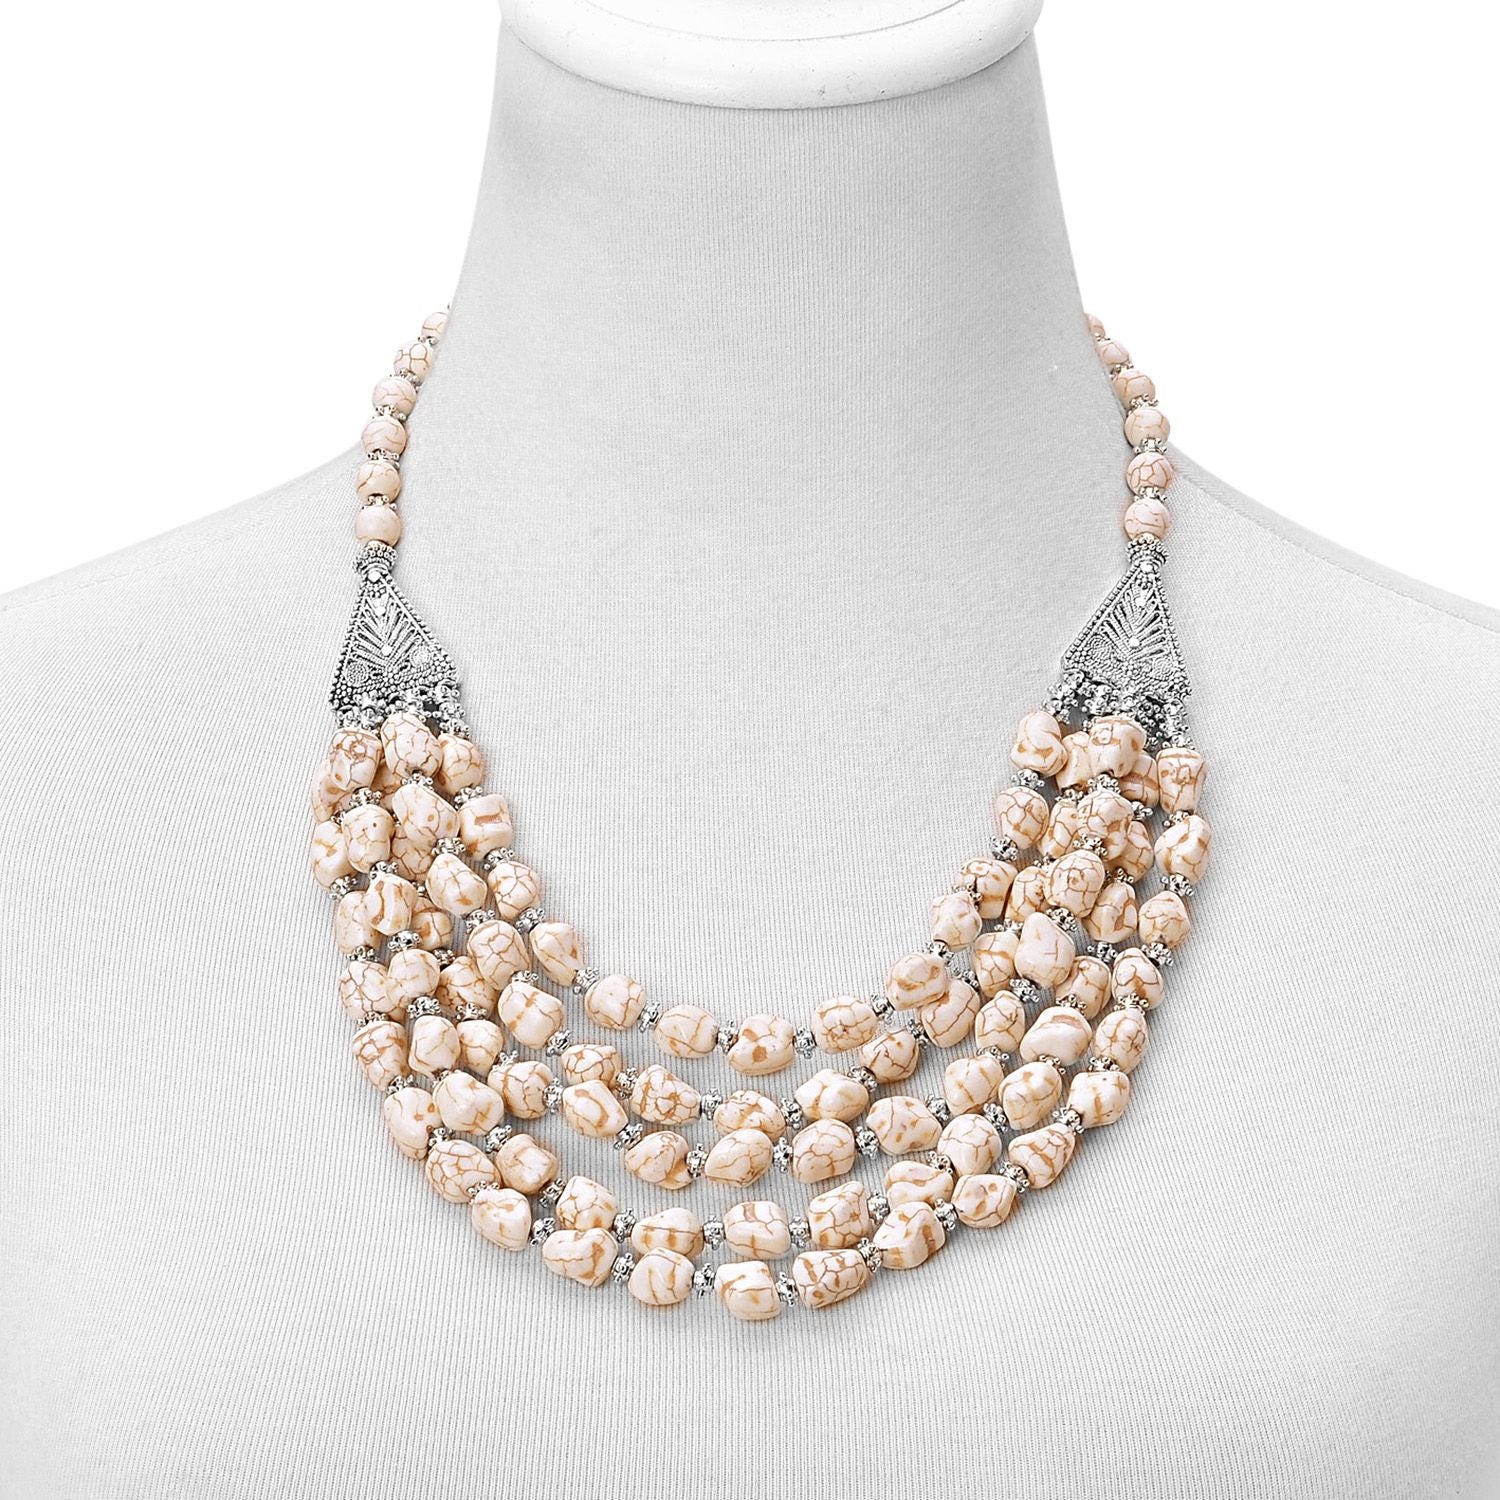 White Howlite Beads Triple Row Drape Necklace in Silver-tone TGW 970.00 cts - Houzz of DVA Boutique